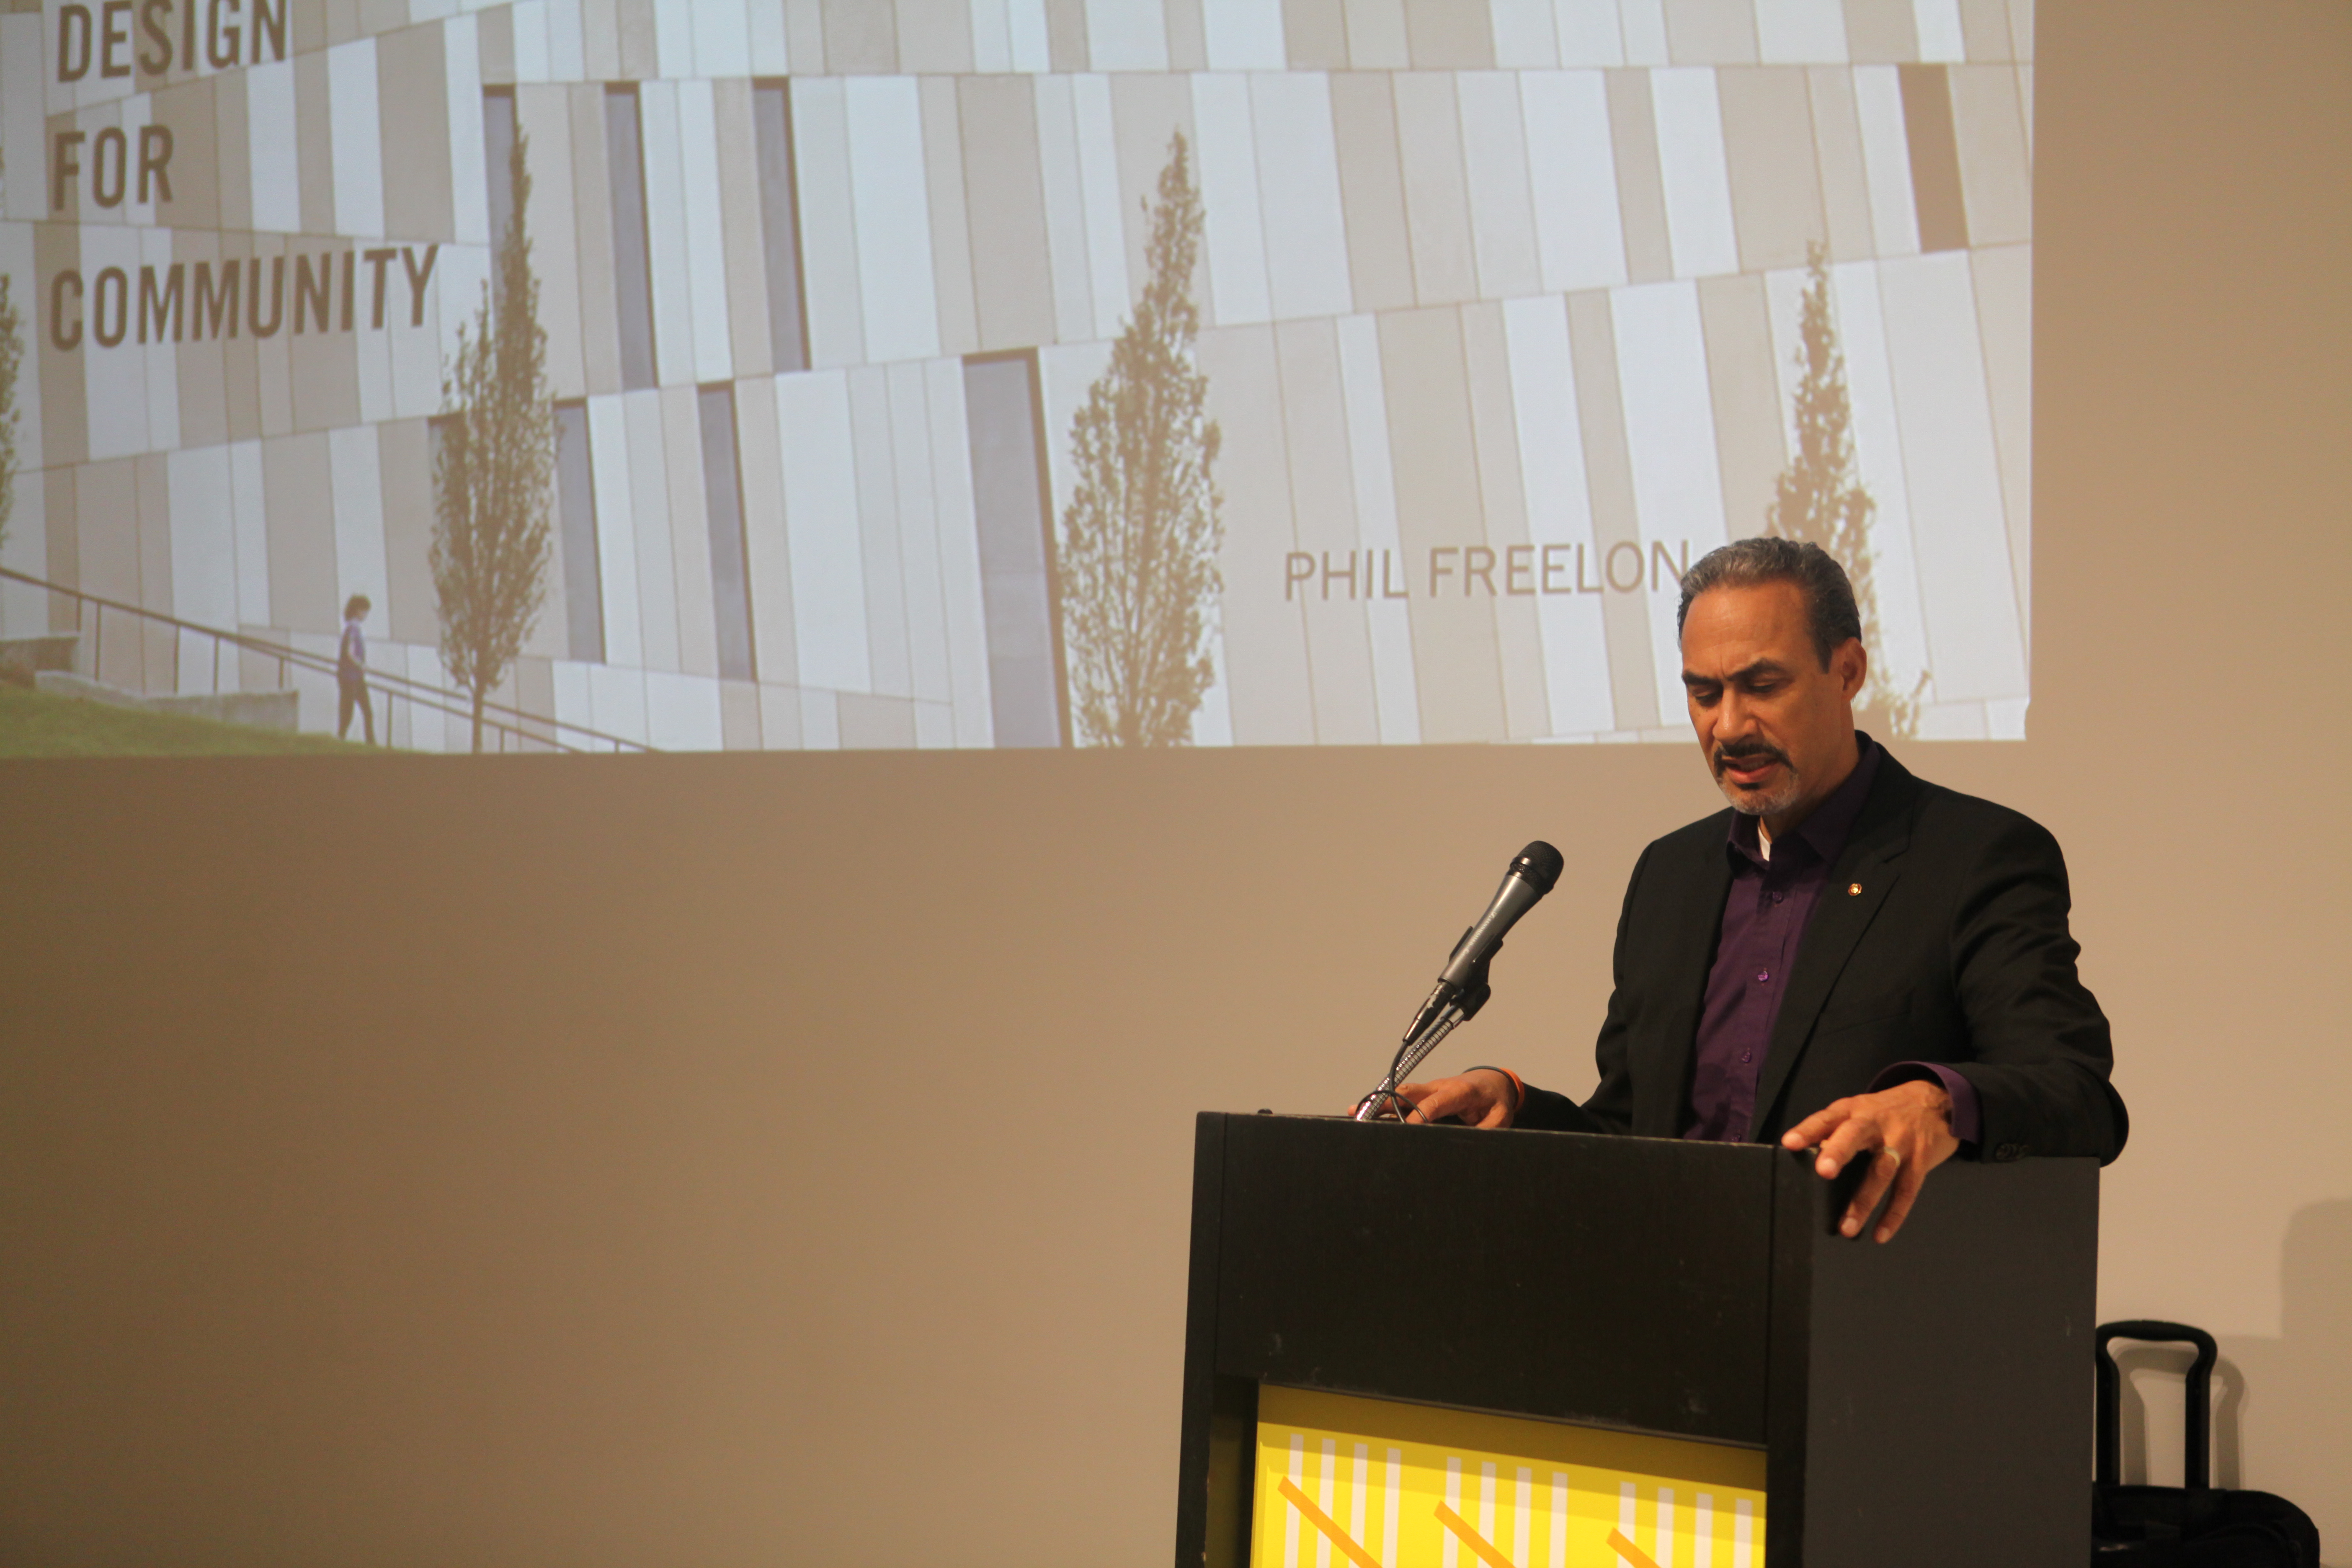 Phil Freelon Blends Practice and Advocacy